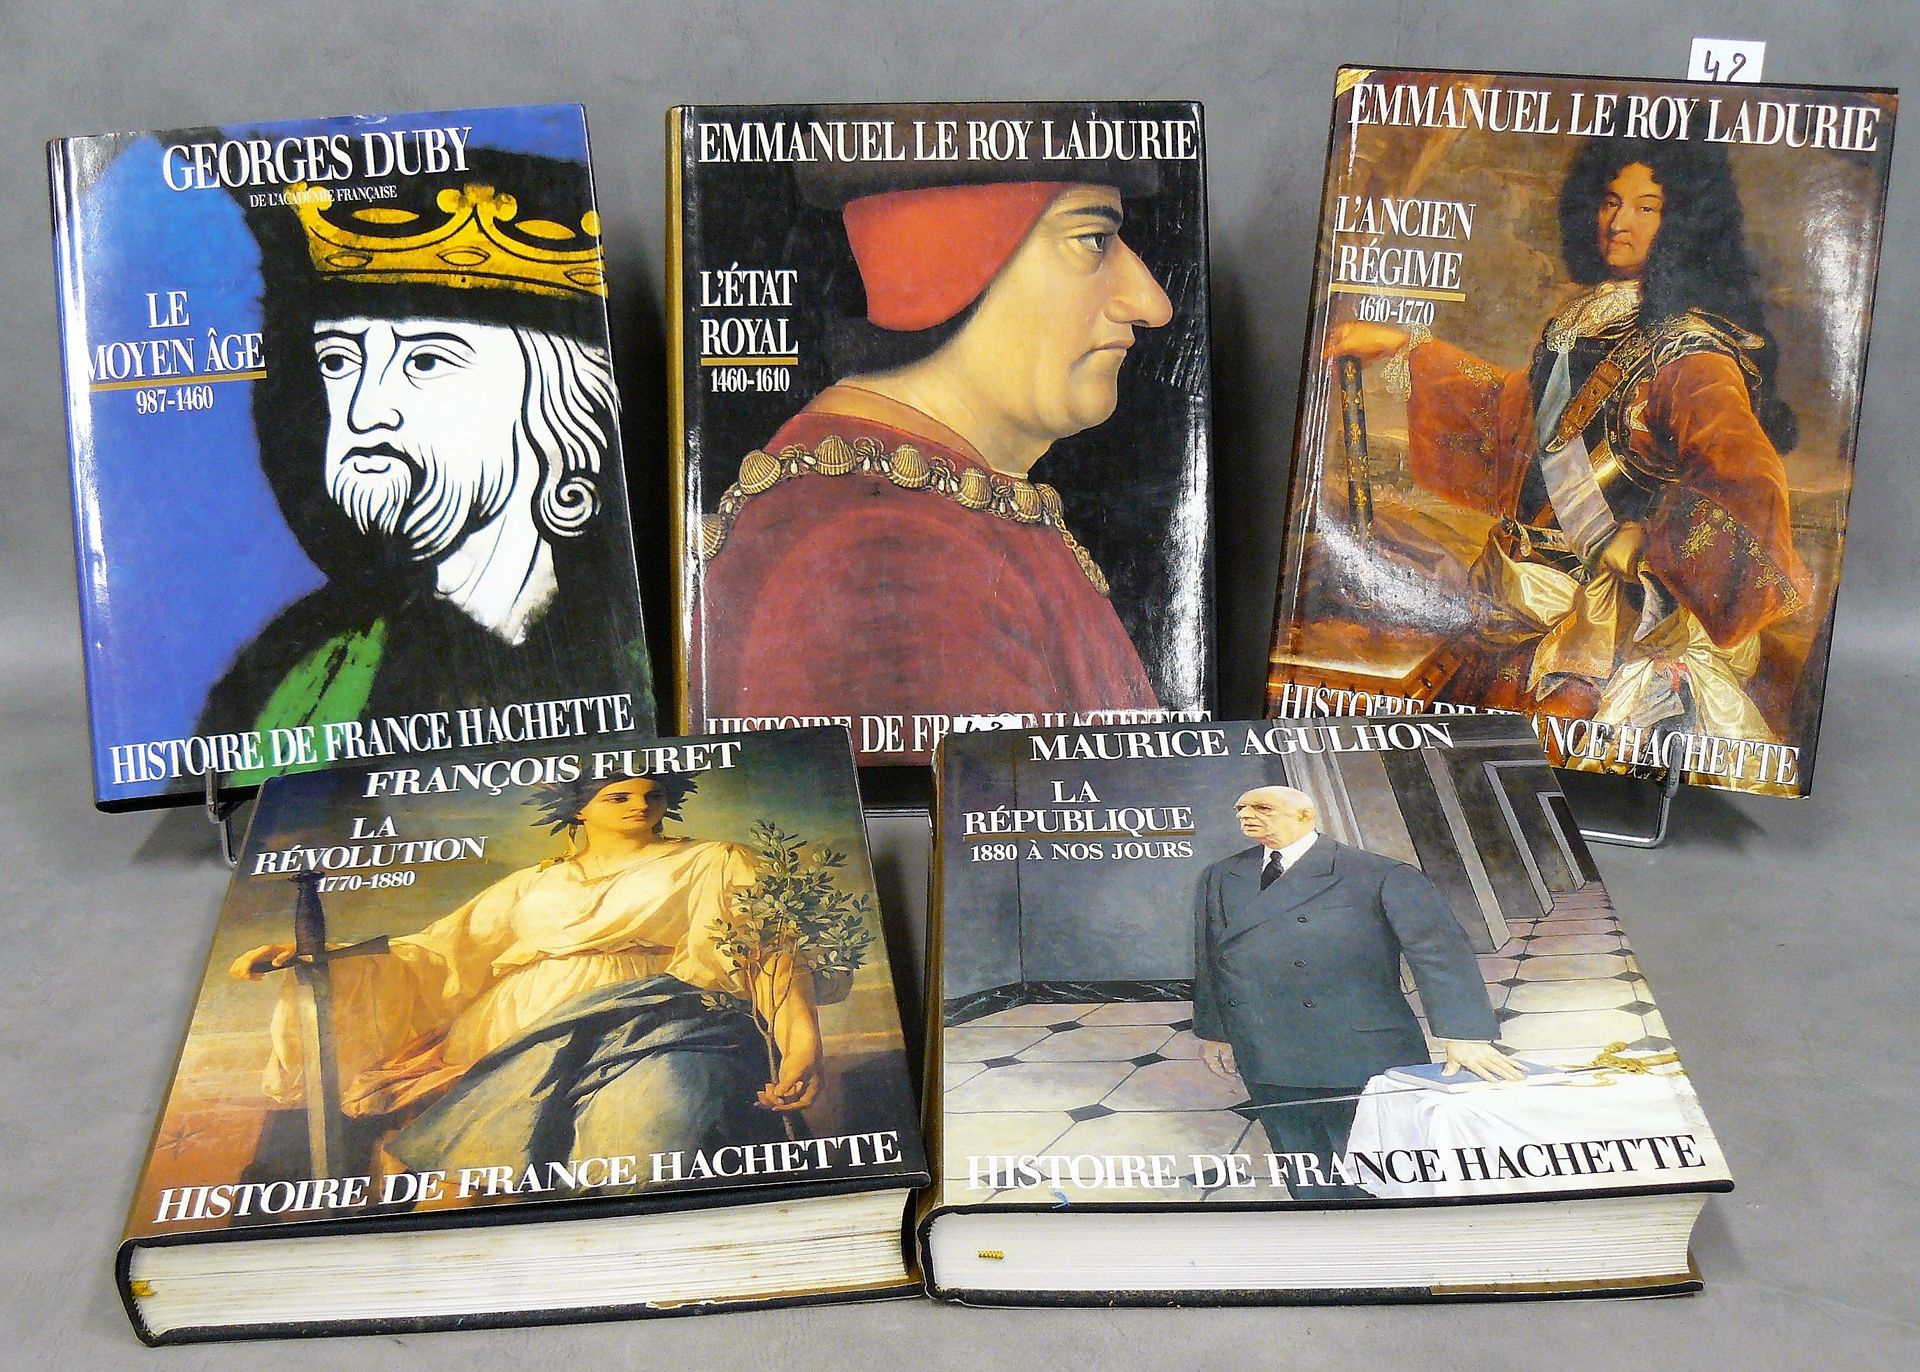 HISTOIRE set of 5 books : History of France Hachette from 987 to nowadays in 5 v&hellip;